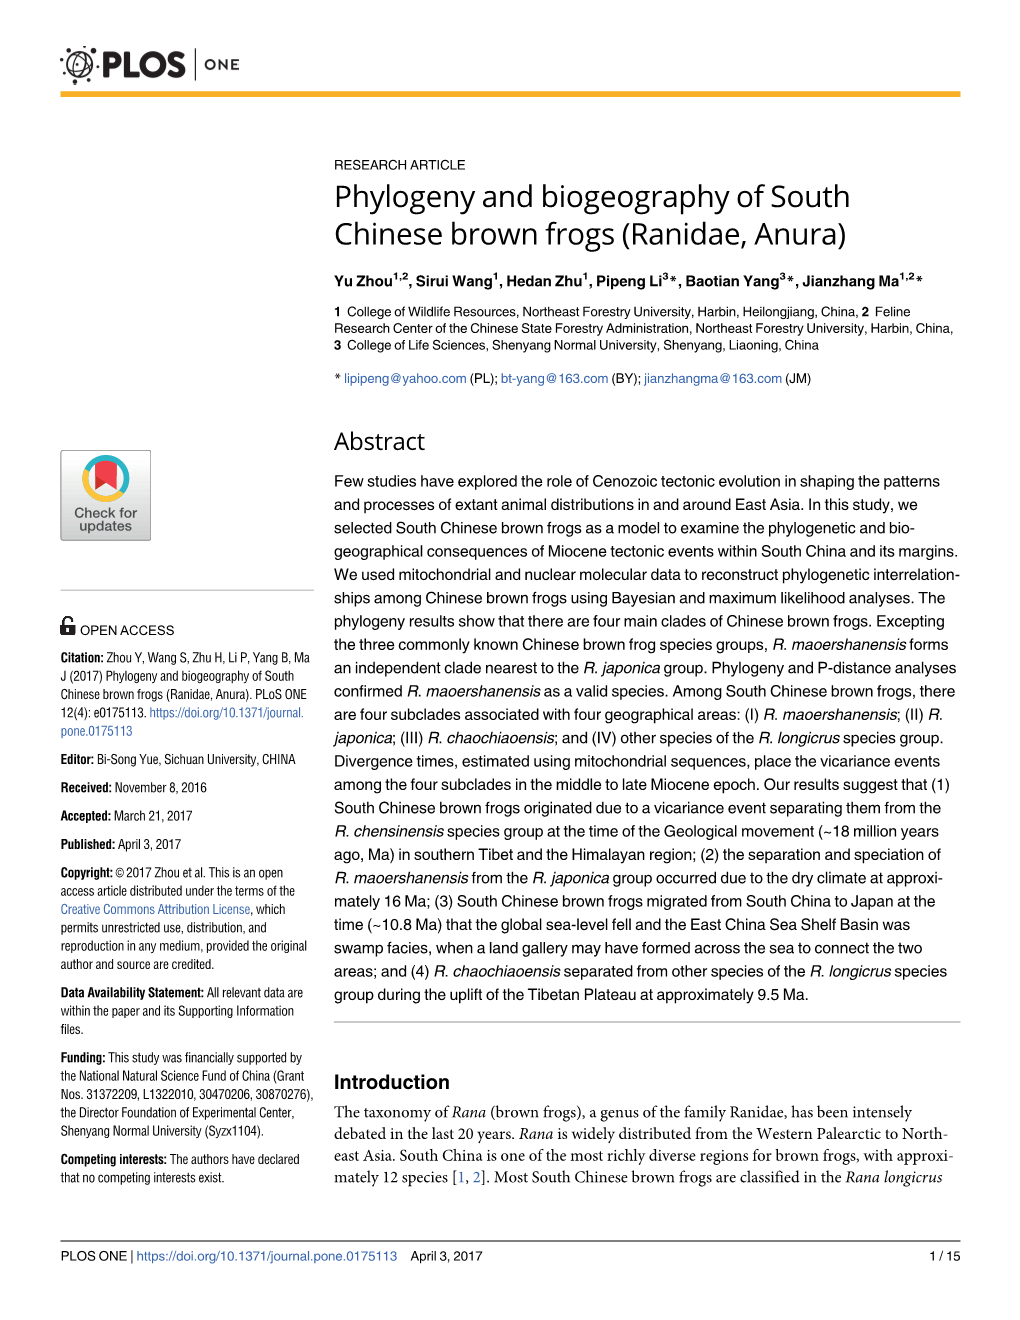 Phylogeny and Biogeography of South Chinese Brown Frogs (Ranidae, Anura)